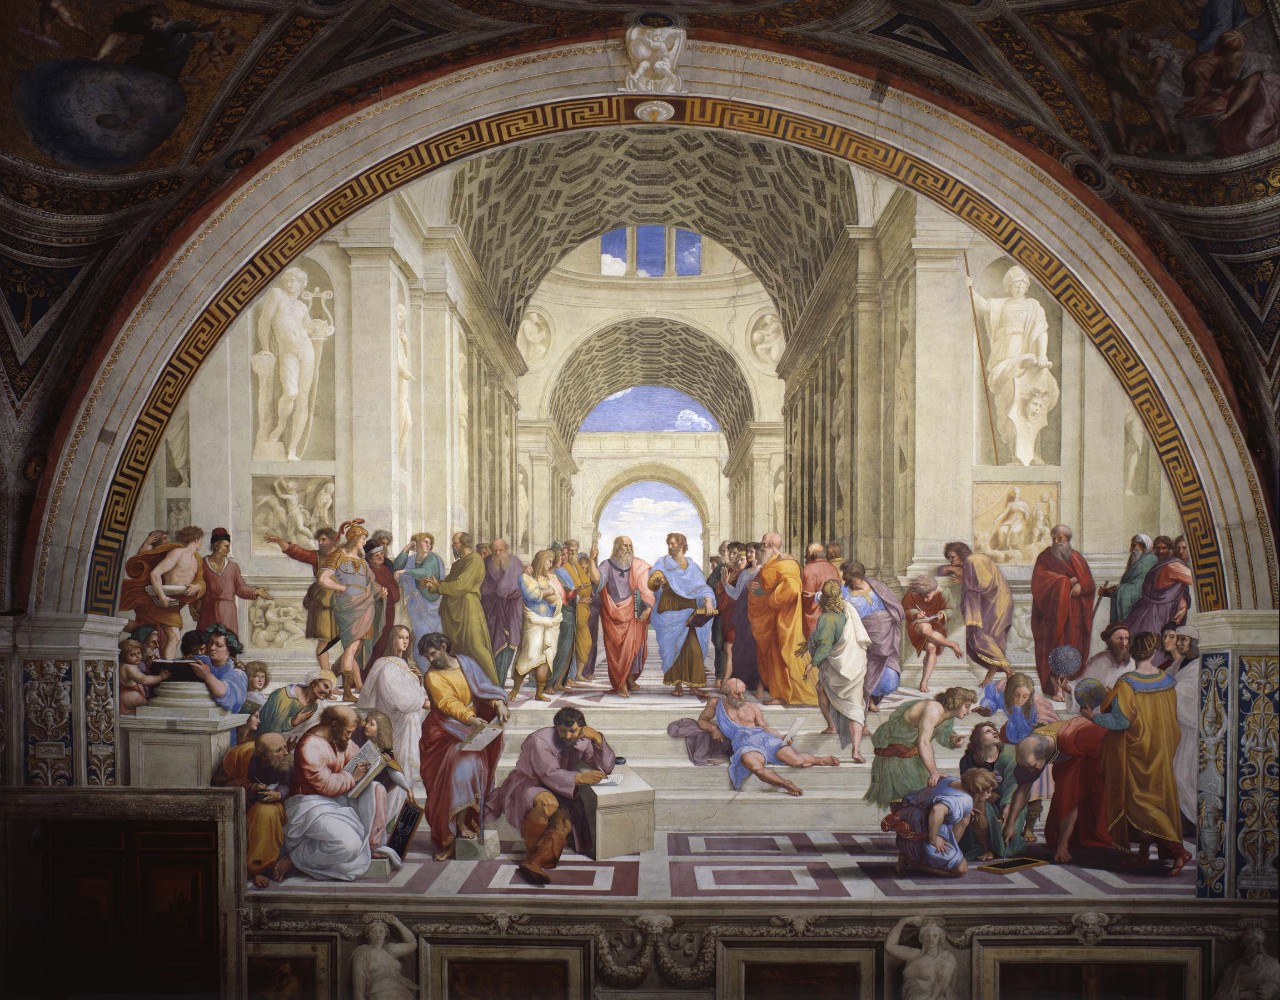 Raphael’s painting "The School of Athens."